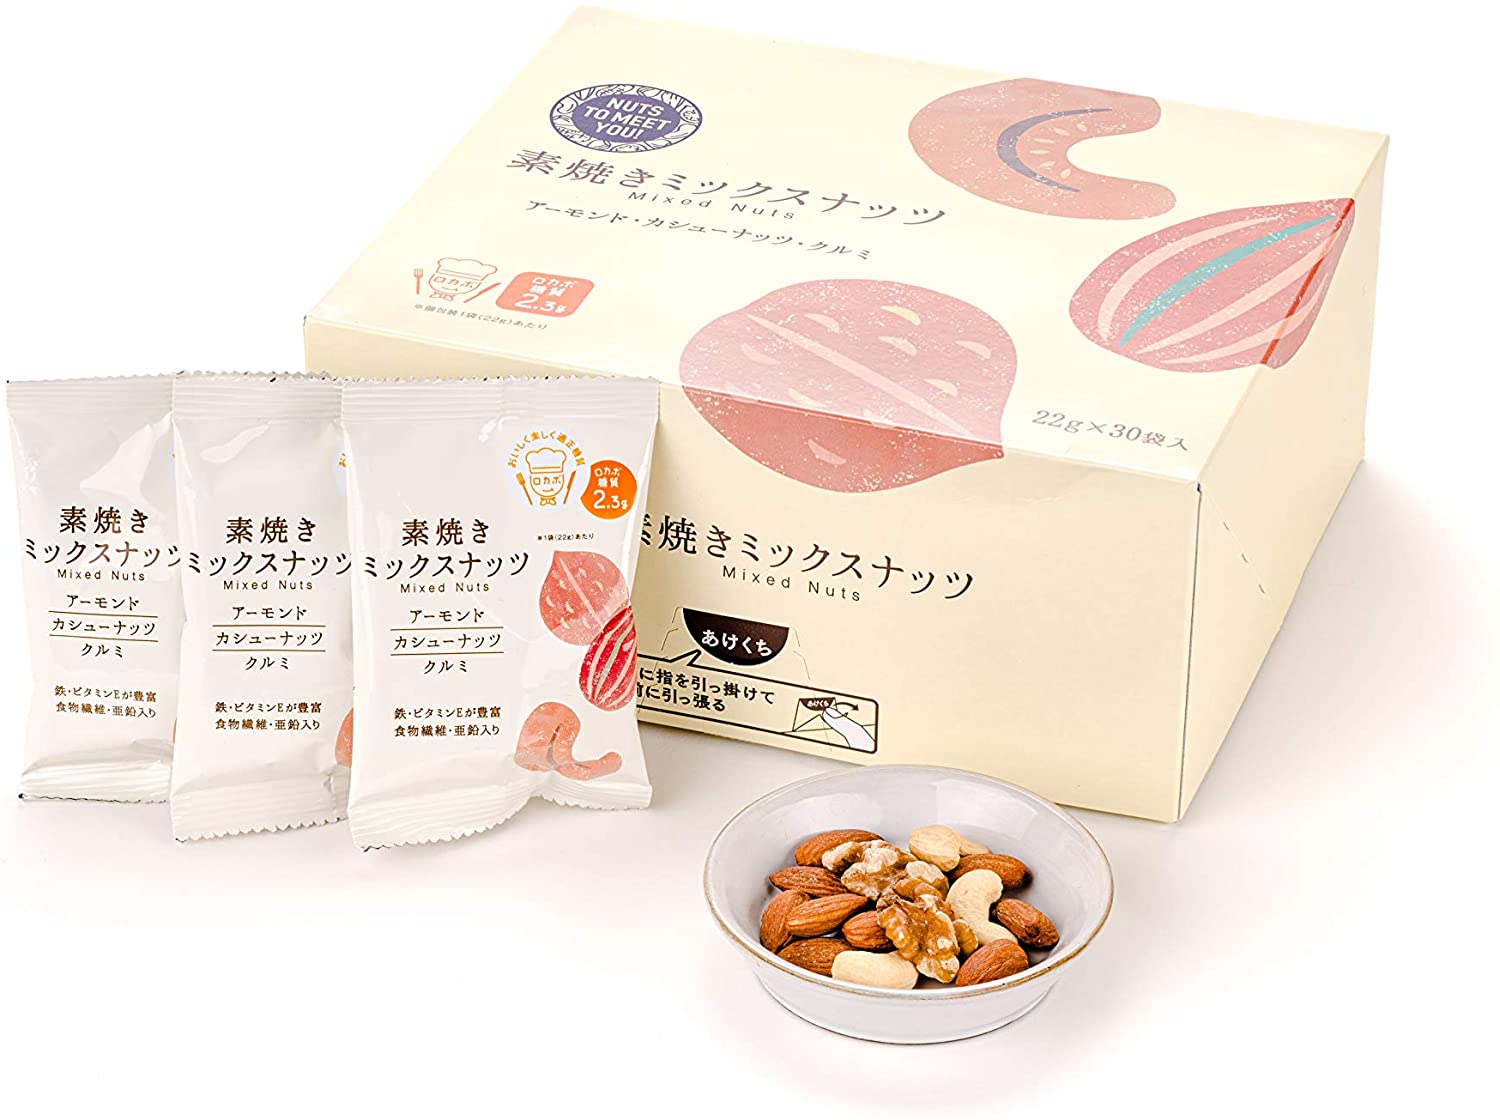 Amazon限定ブランド『NUTS TO MEET YOU』